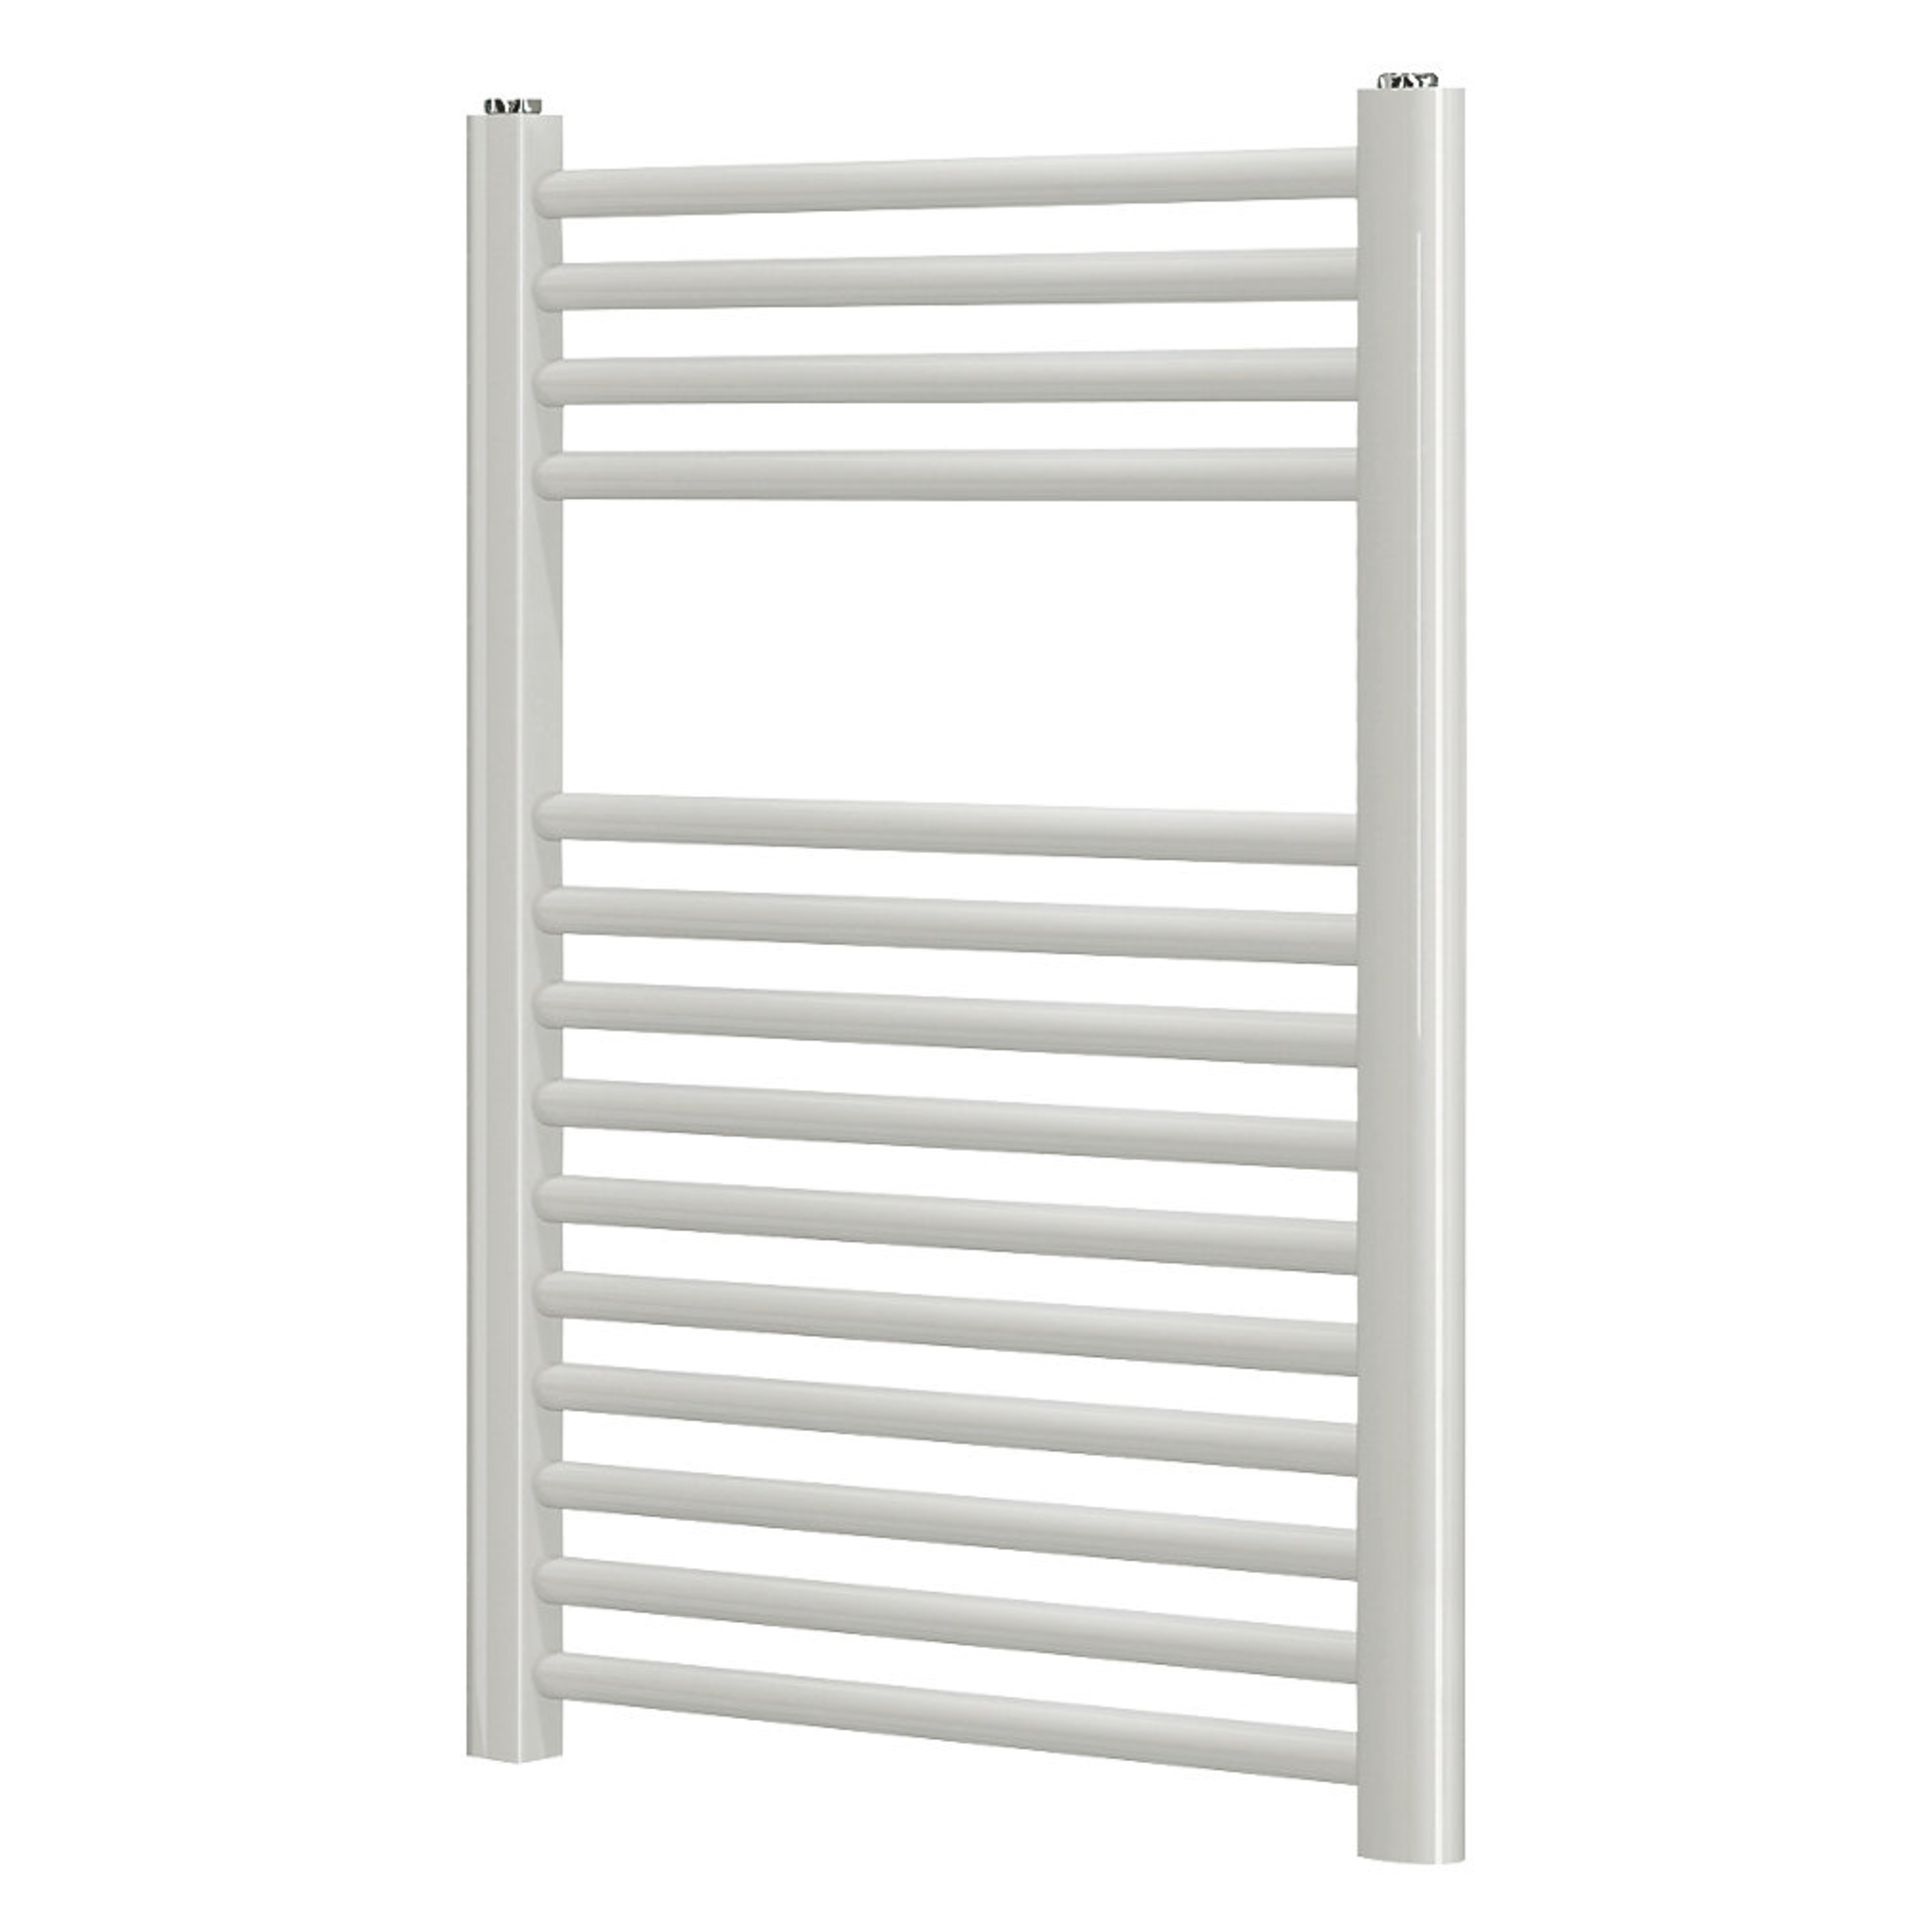 (EY161) 700 x 400mm Curved White Towel Radiator. Powder-Coated Mild Steel Construction High